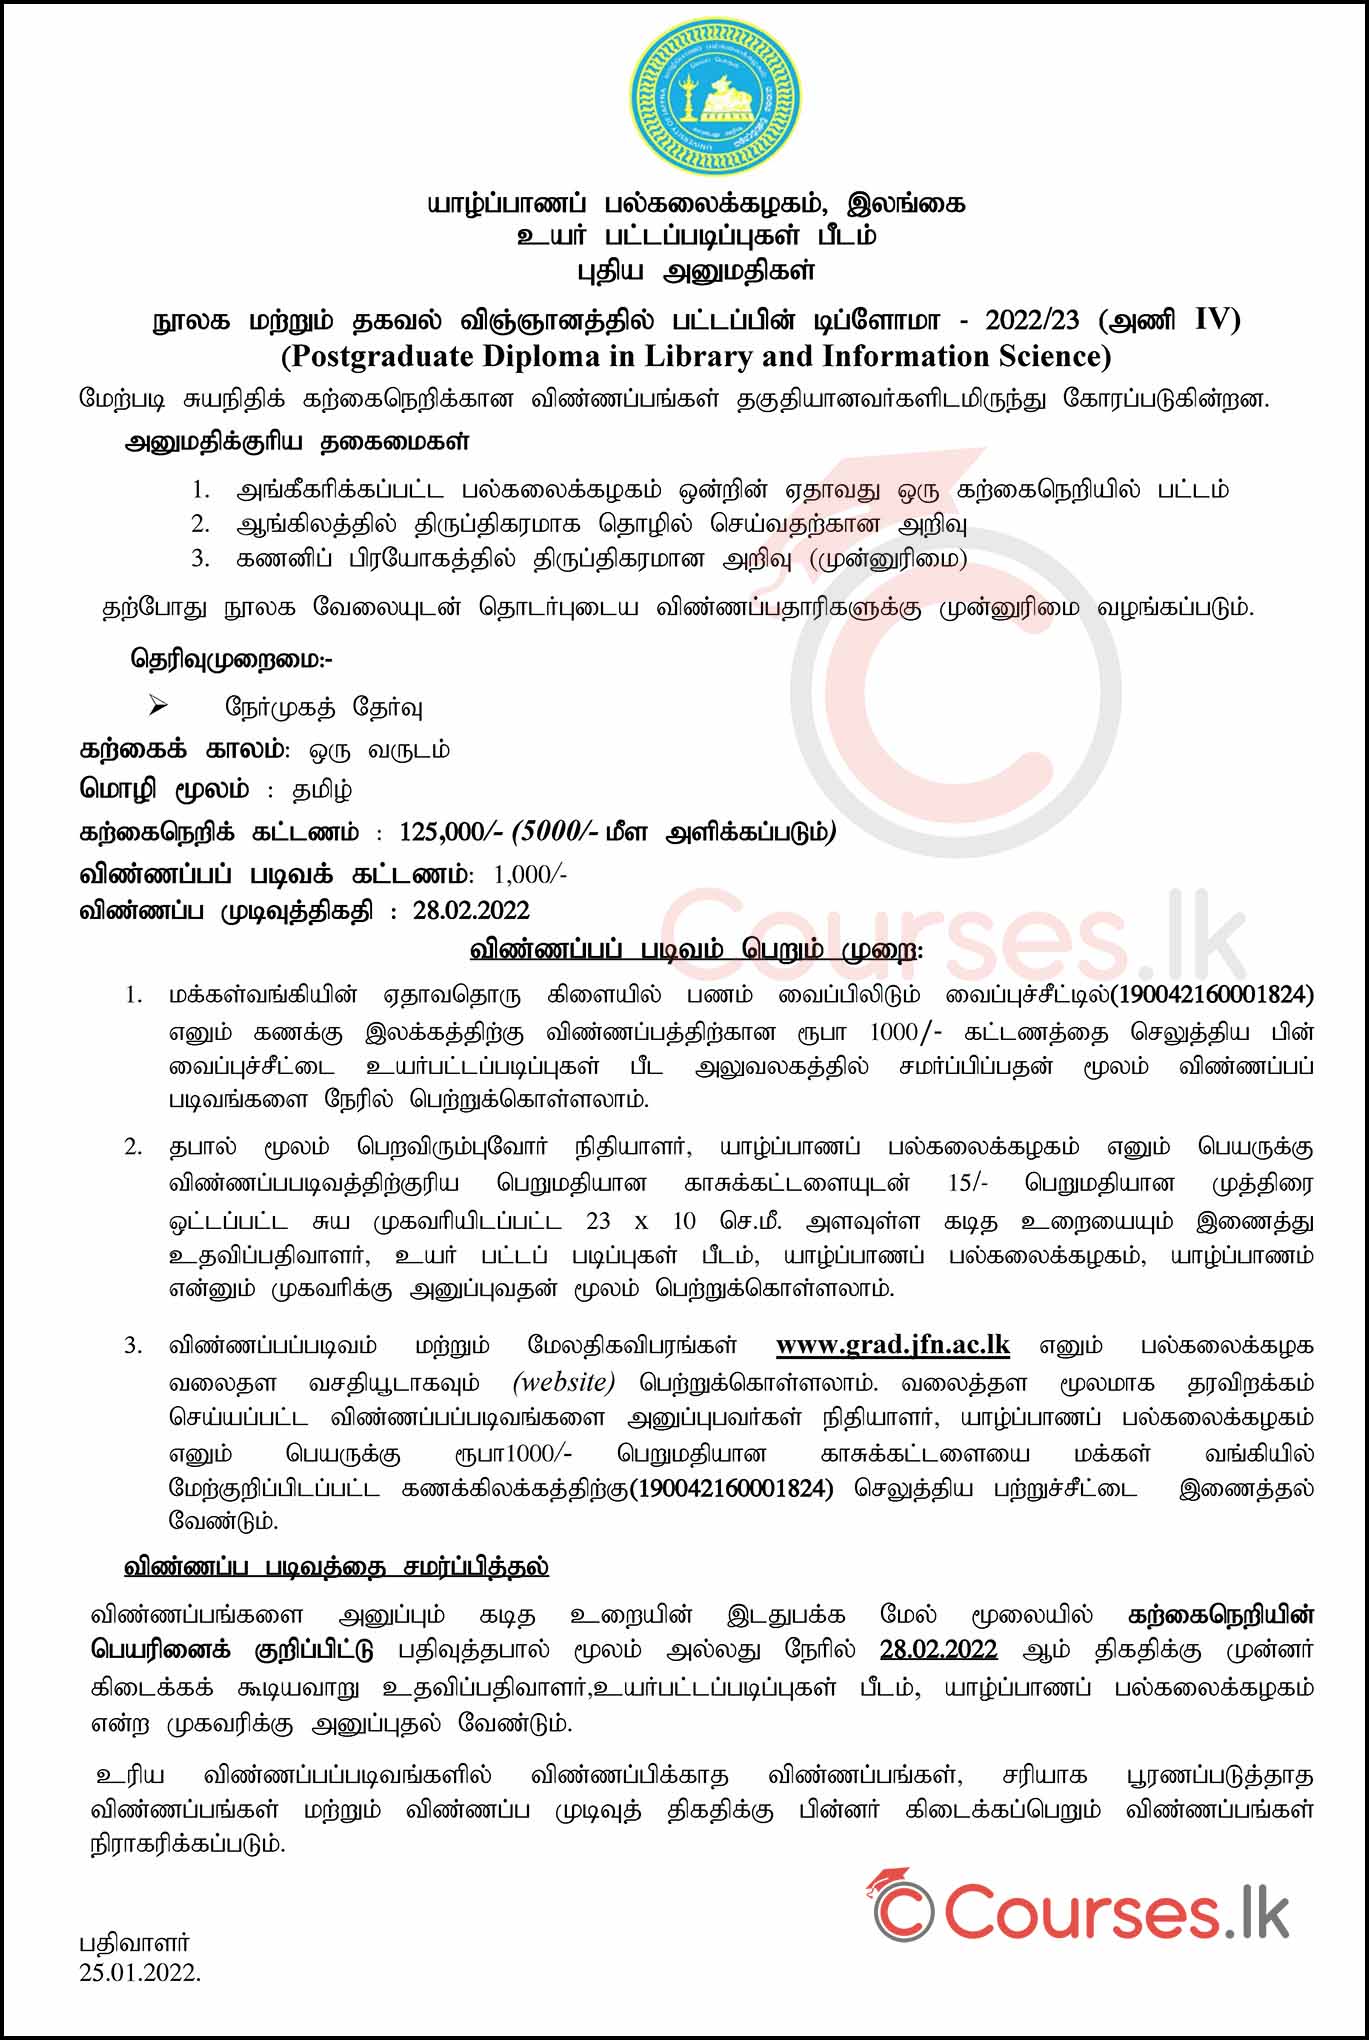 PGD in Library and Information Science 2022/23 - University of Jaffna